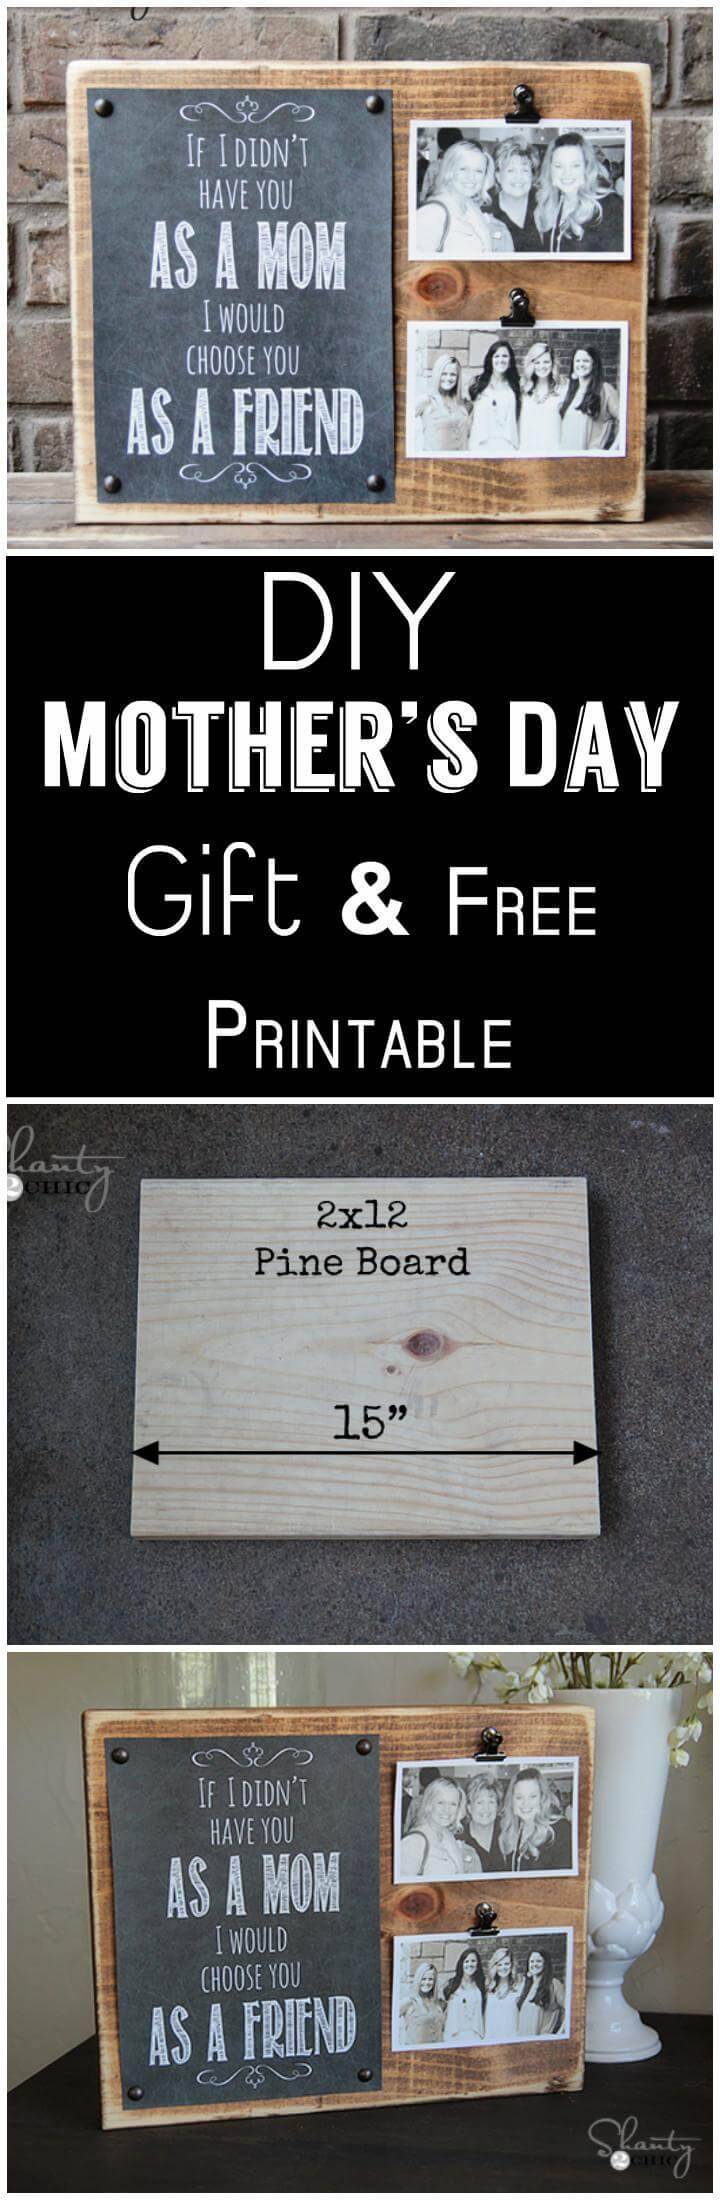 DIY Mother's Day gift and Free Printable